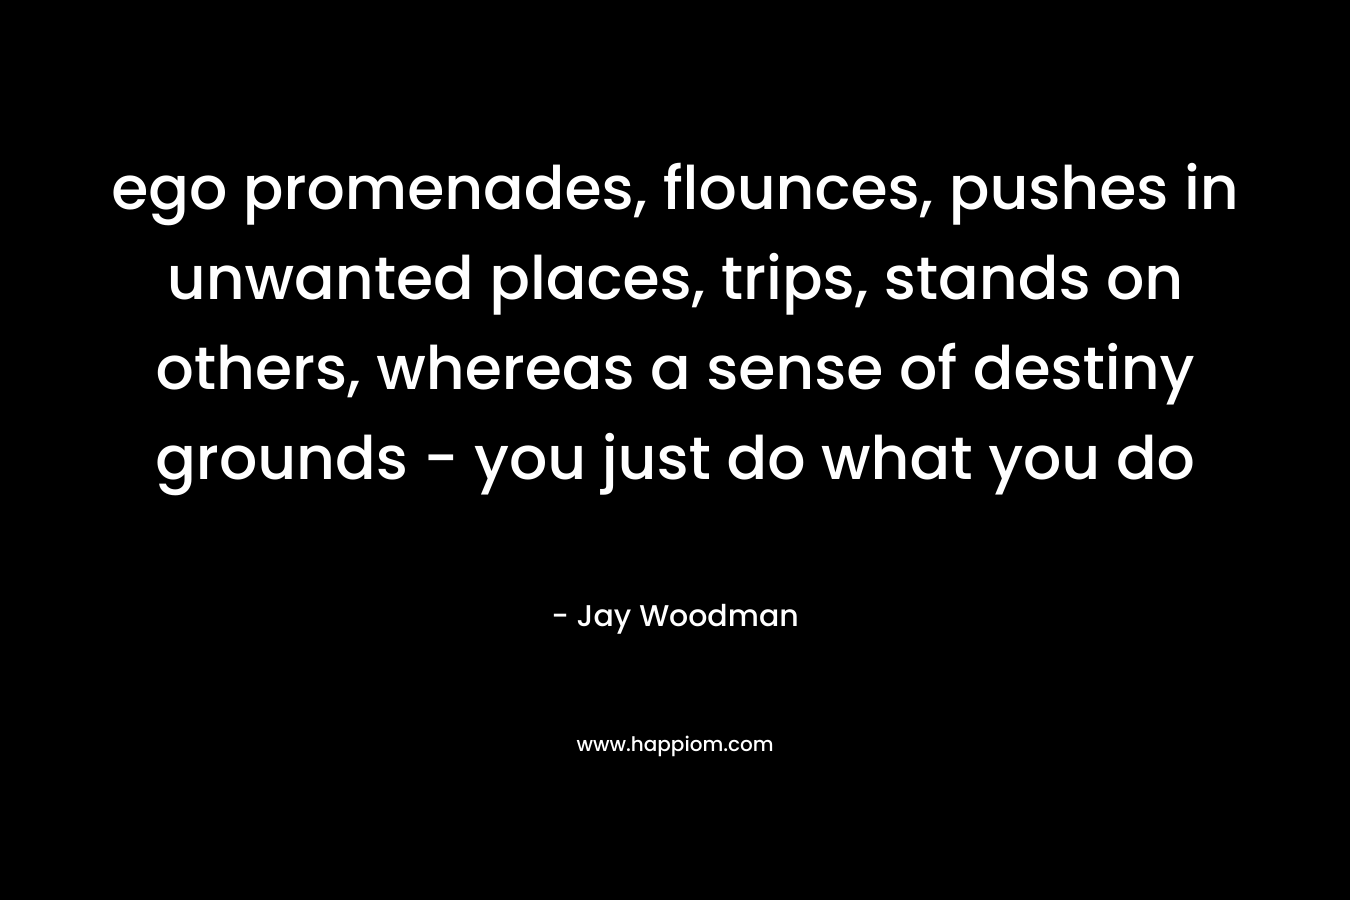 ego promenades, flounces, pushes in unwanted places, trips, stands on others, whereas a sense of destiny grounds – you just do what you do – Jay Woodman